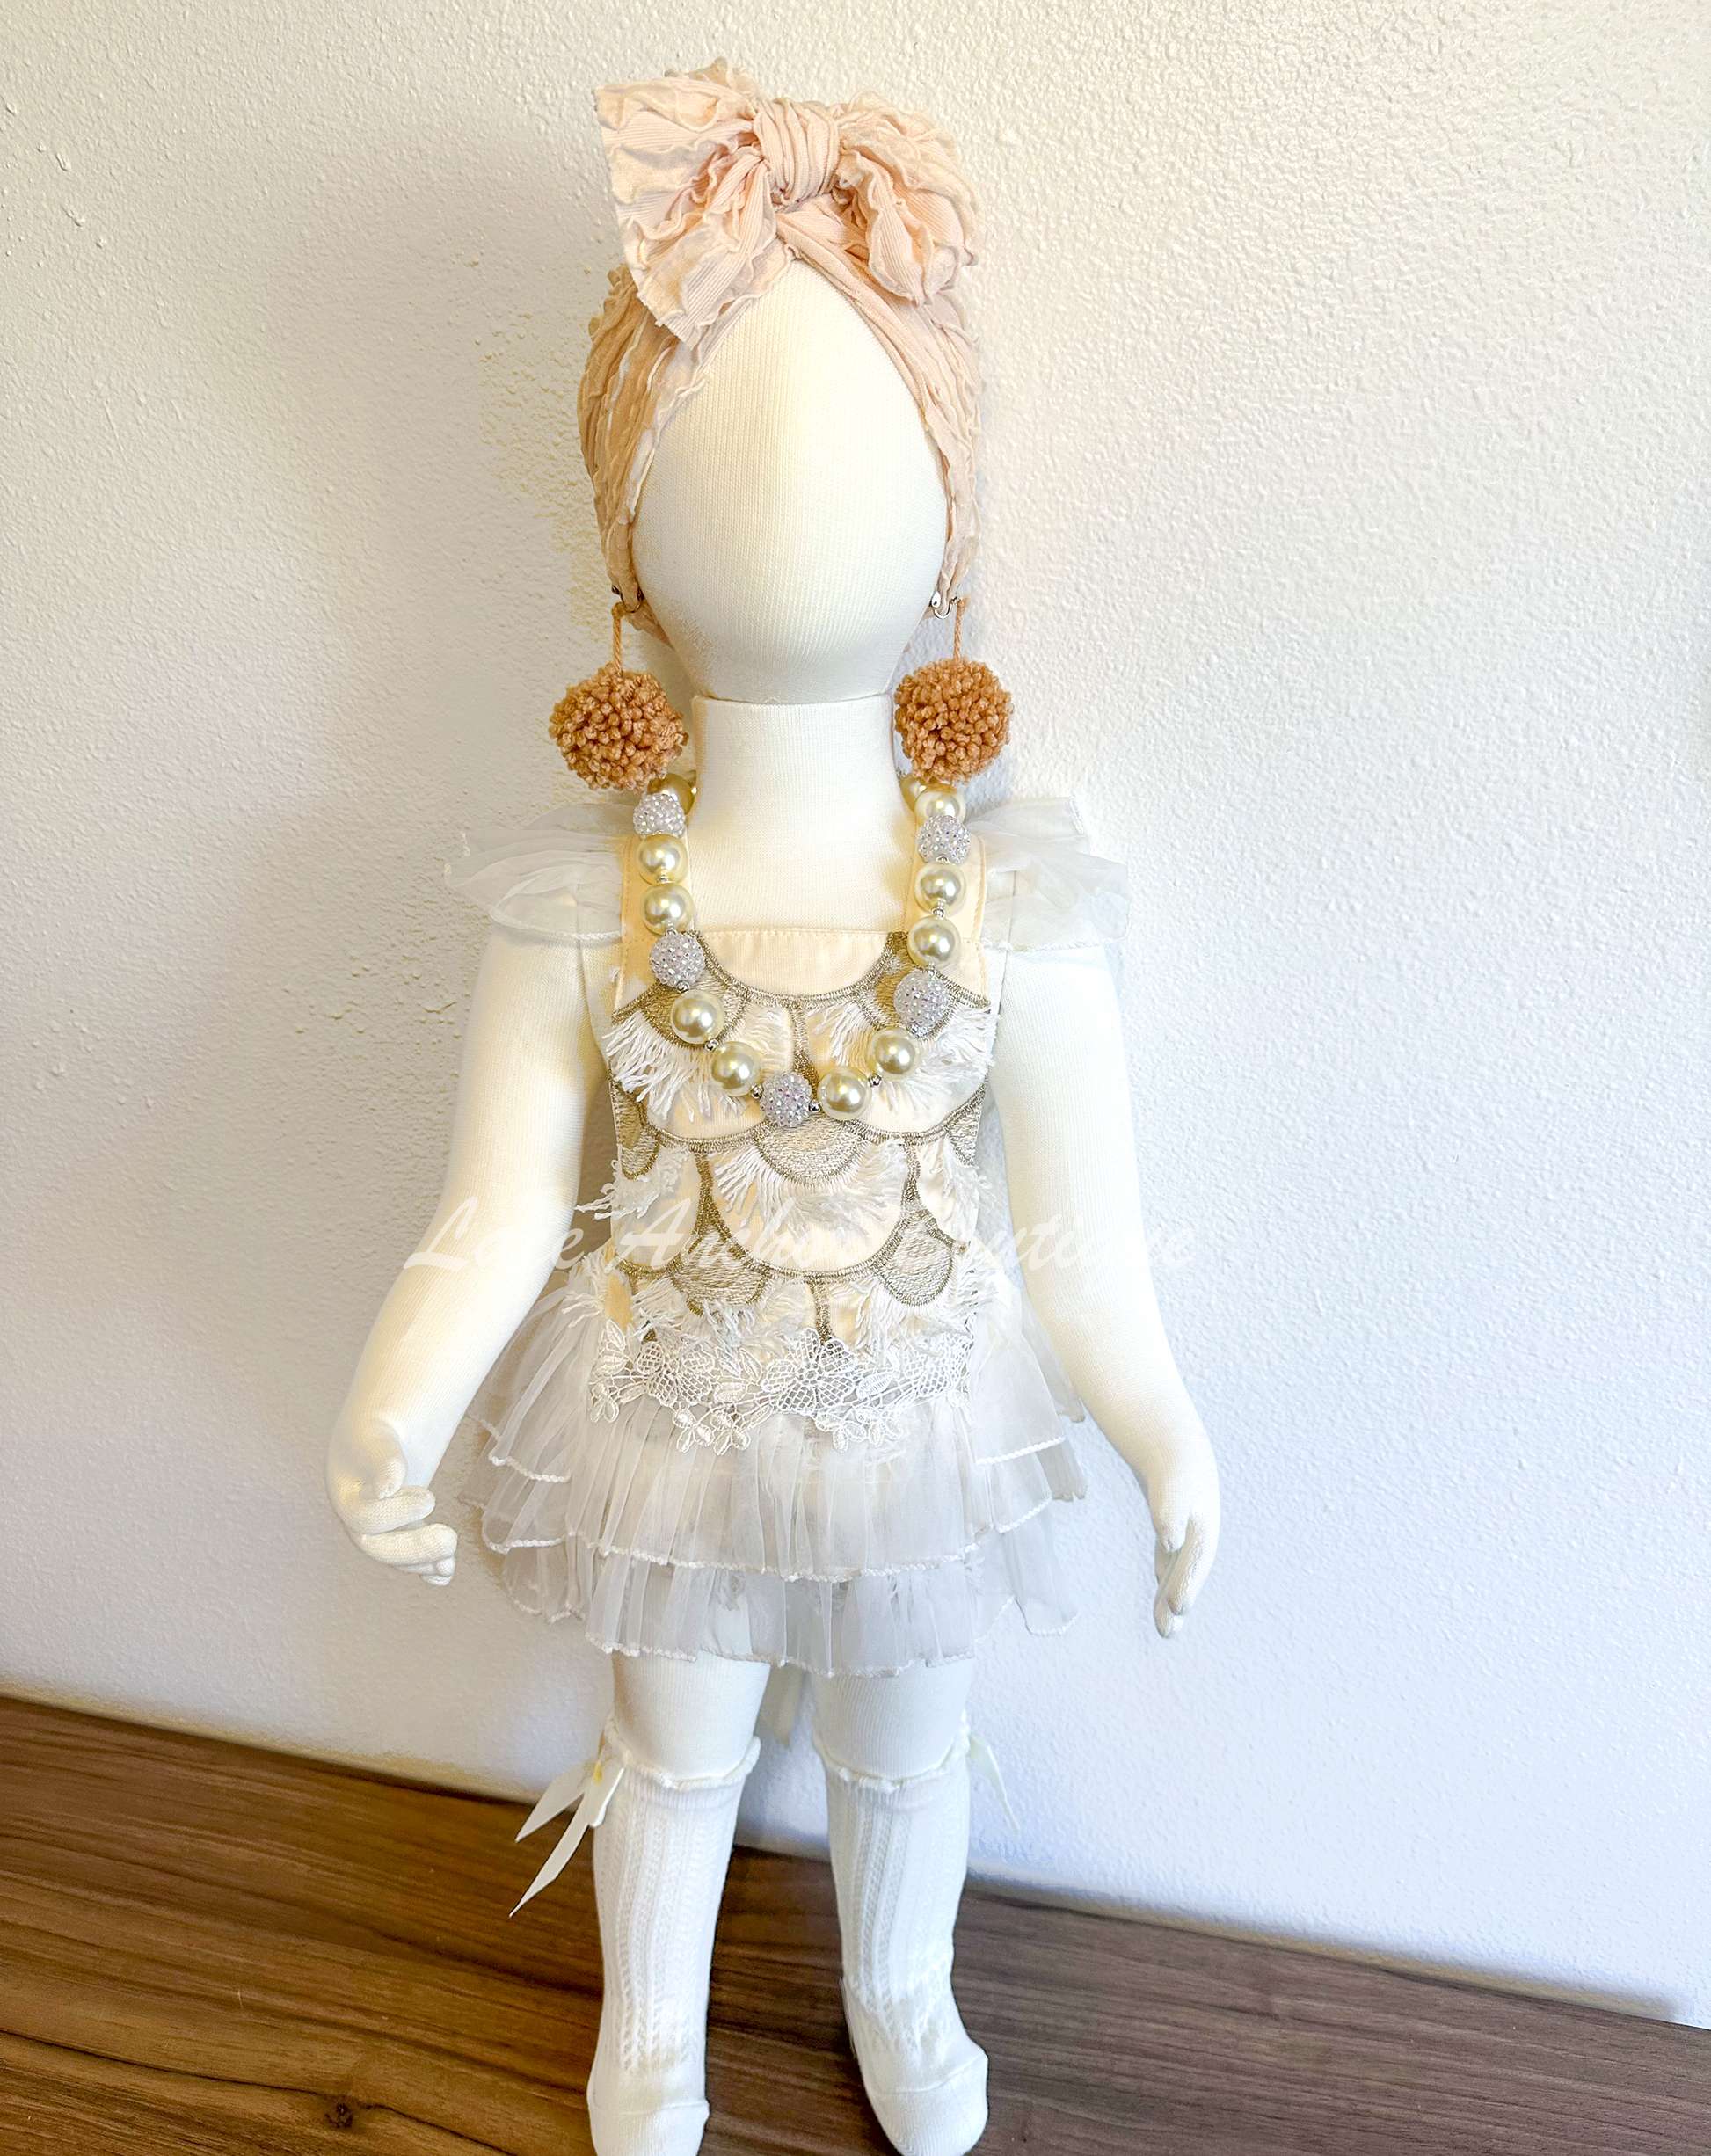 cream ivory baby girls romper outfit. Romper with tied back, fringe embroidered details in gold and white, lace trim, ruffled white layered skirt. First birthday smash cake outfit.